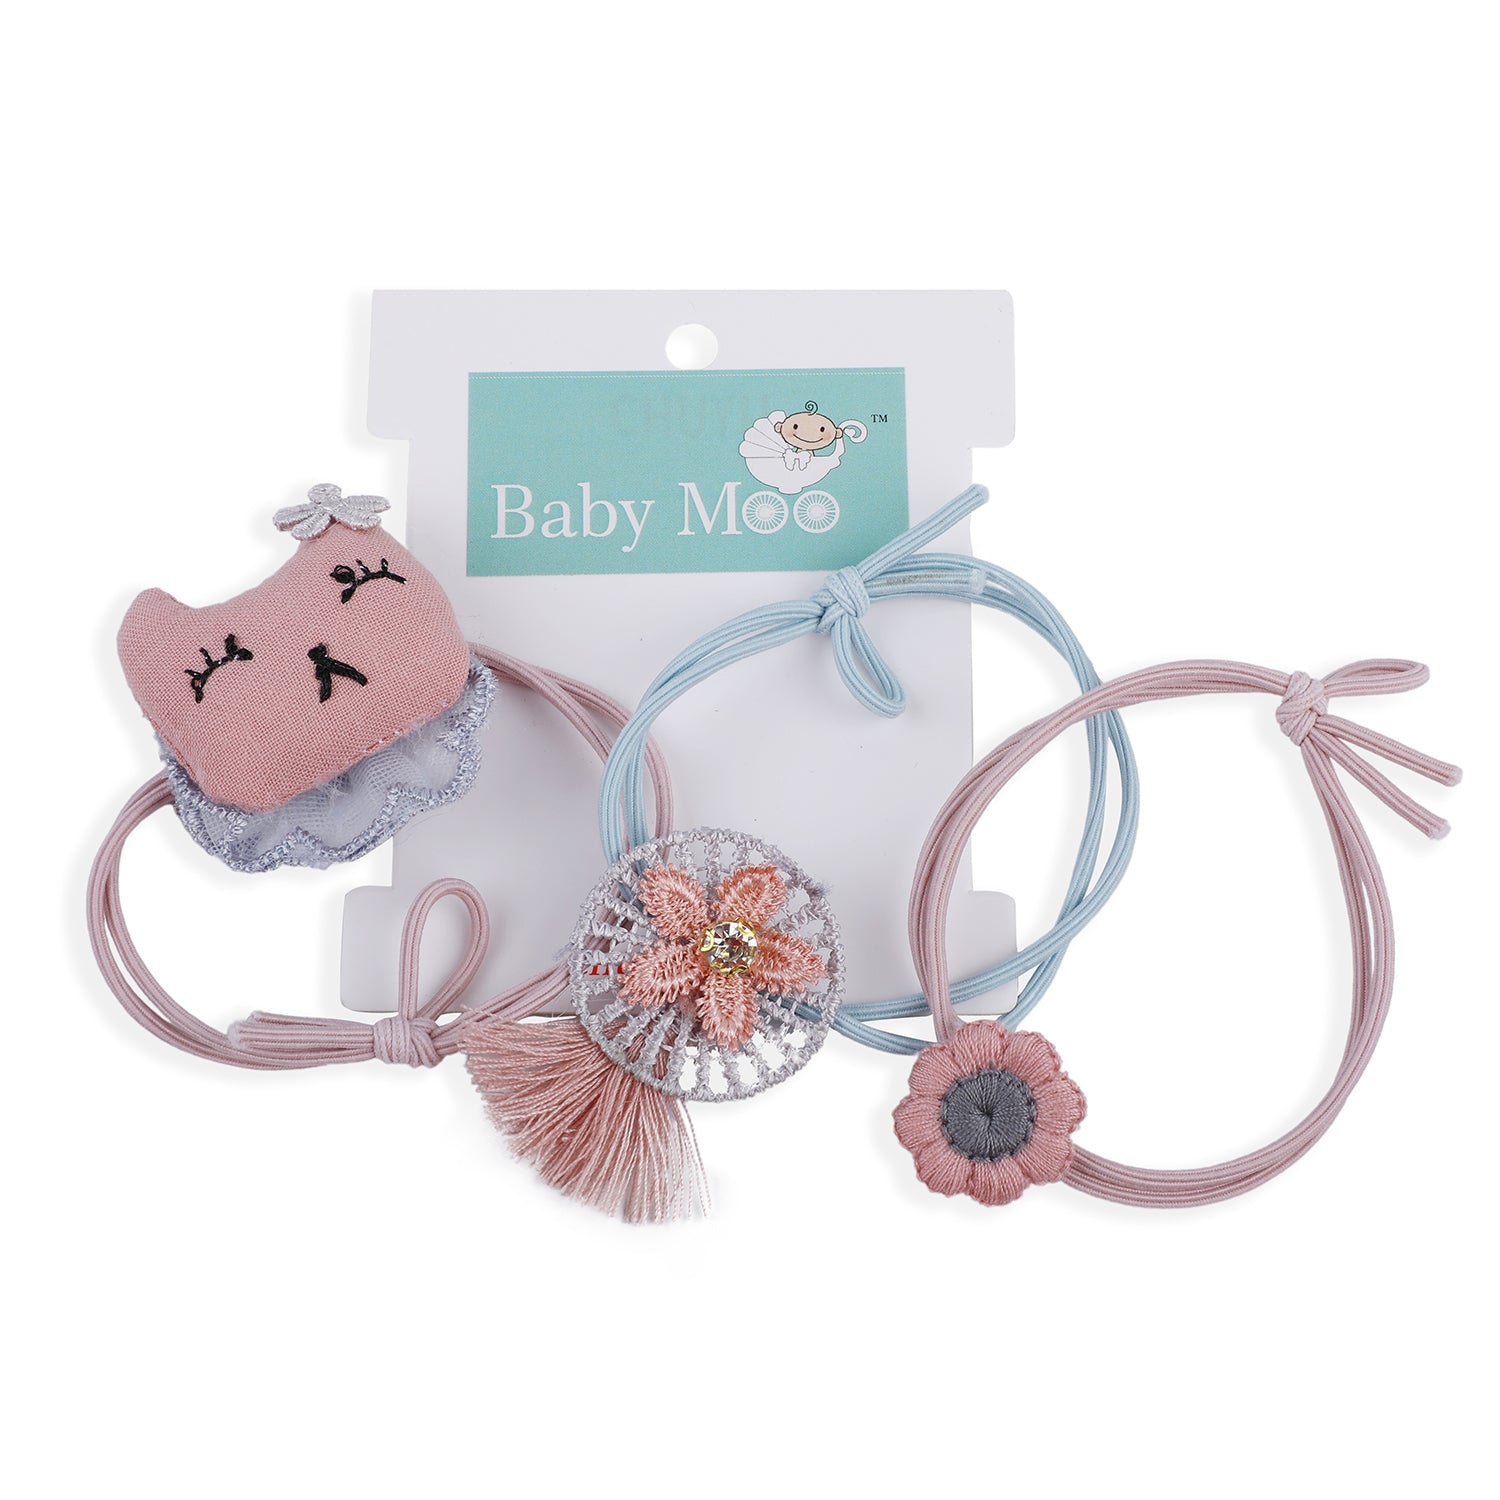 Floral Rubber Bands Hair Accessories 3 Pcs - Pink - Baby Moo